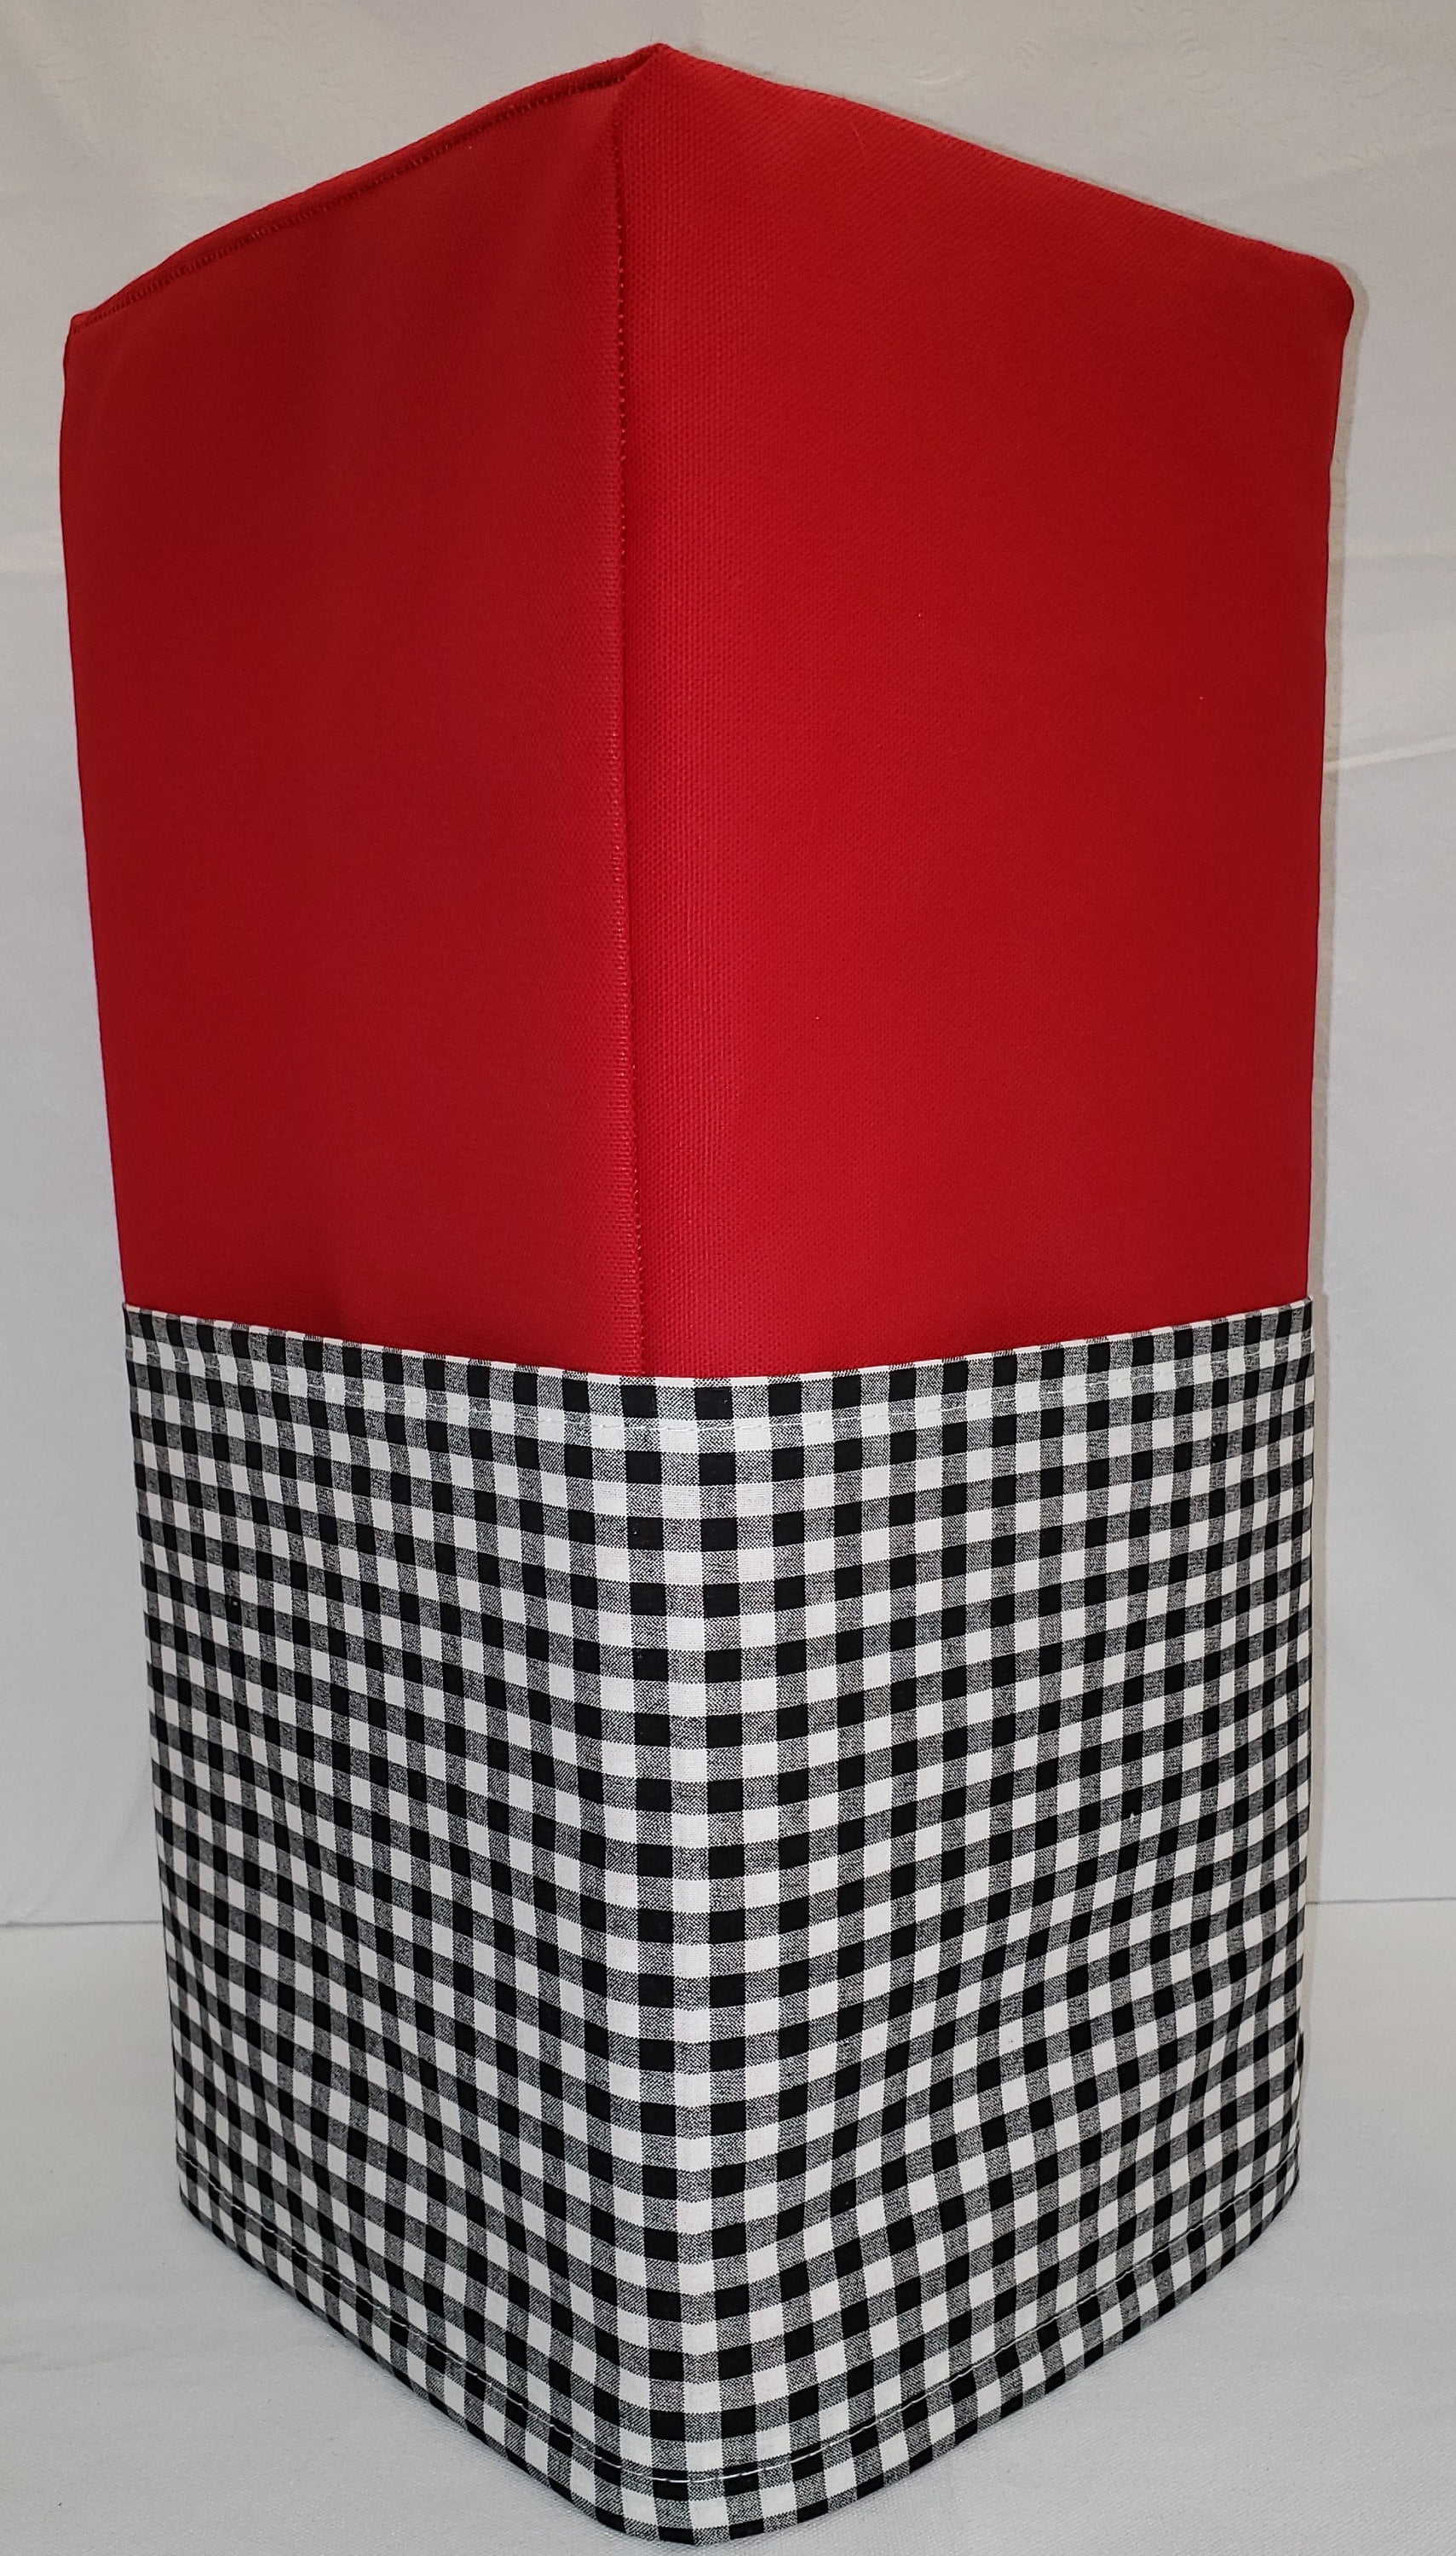 Canvas Red Checked Blender Cover Sizing Chart Located in Item Details